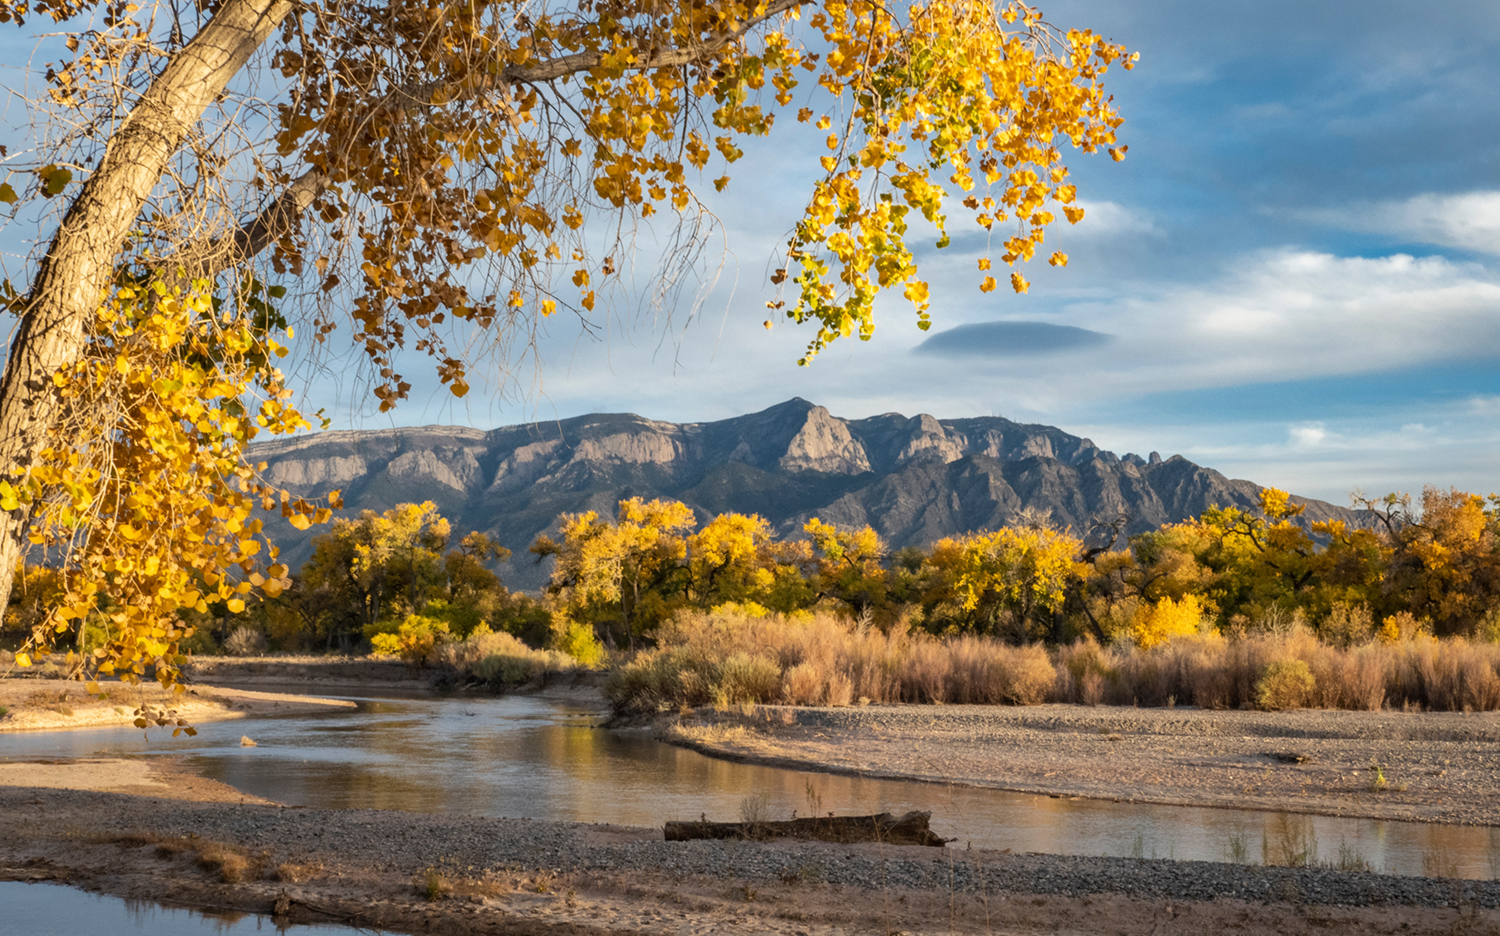 River and mountains in New Mexico.